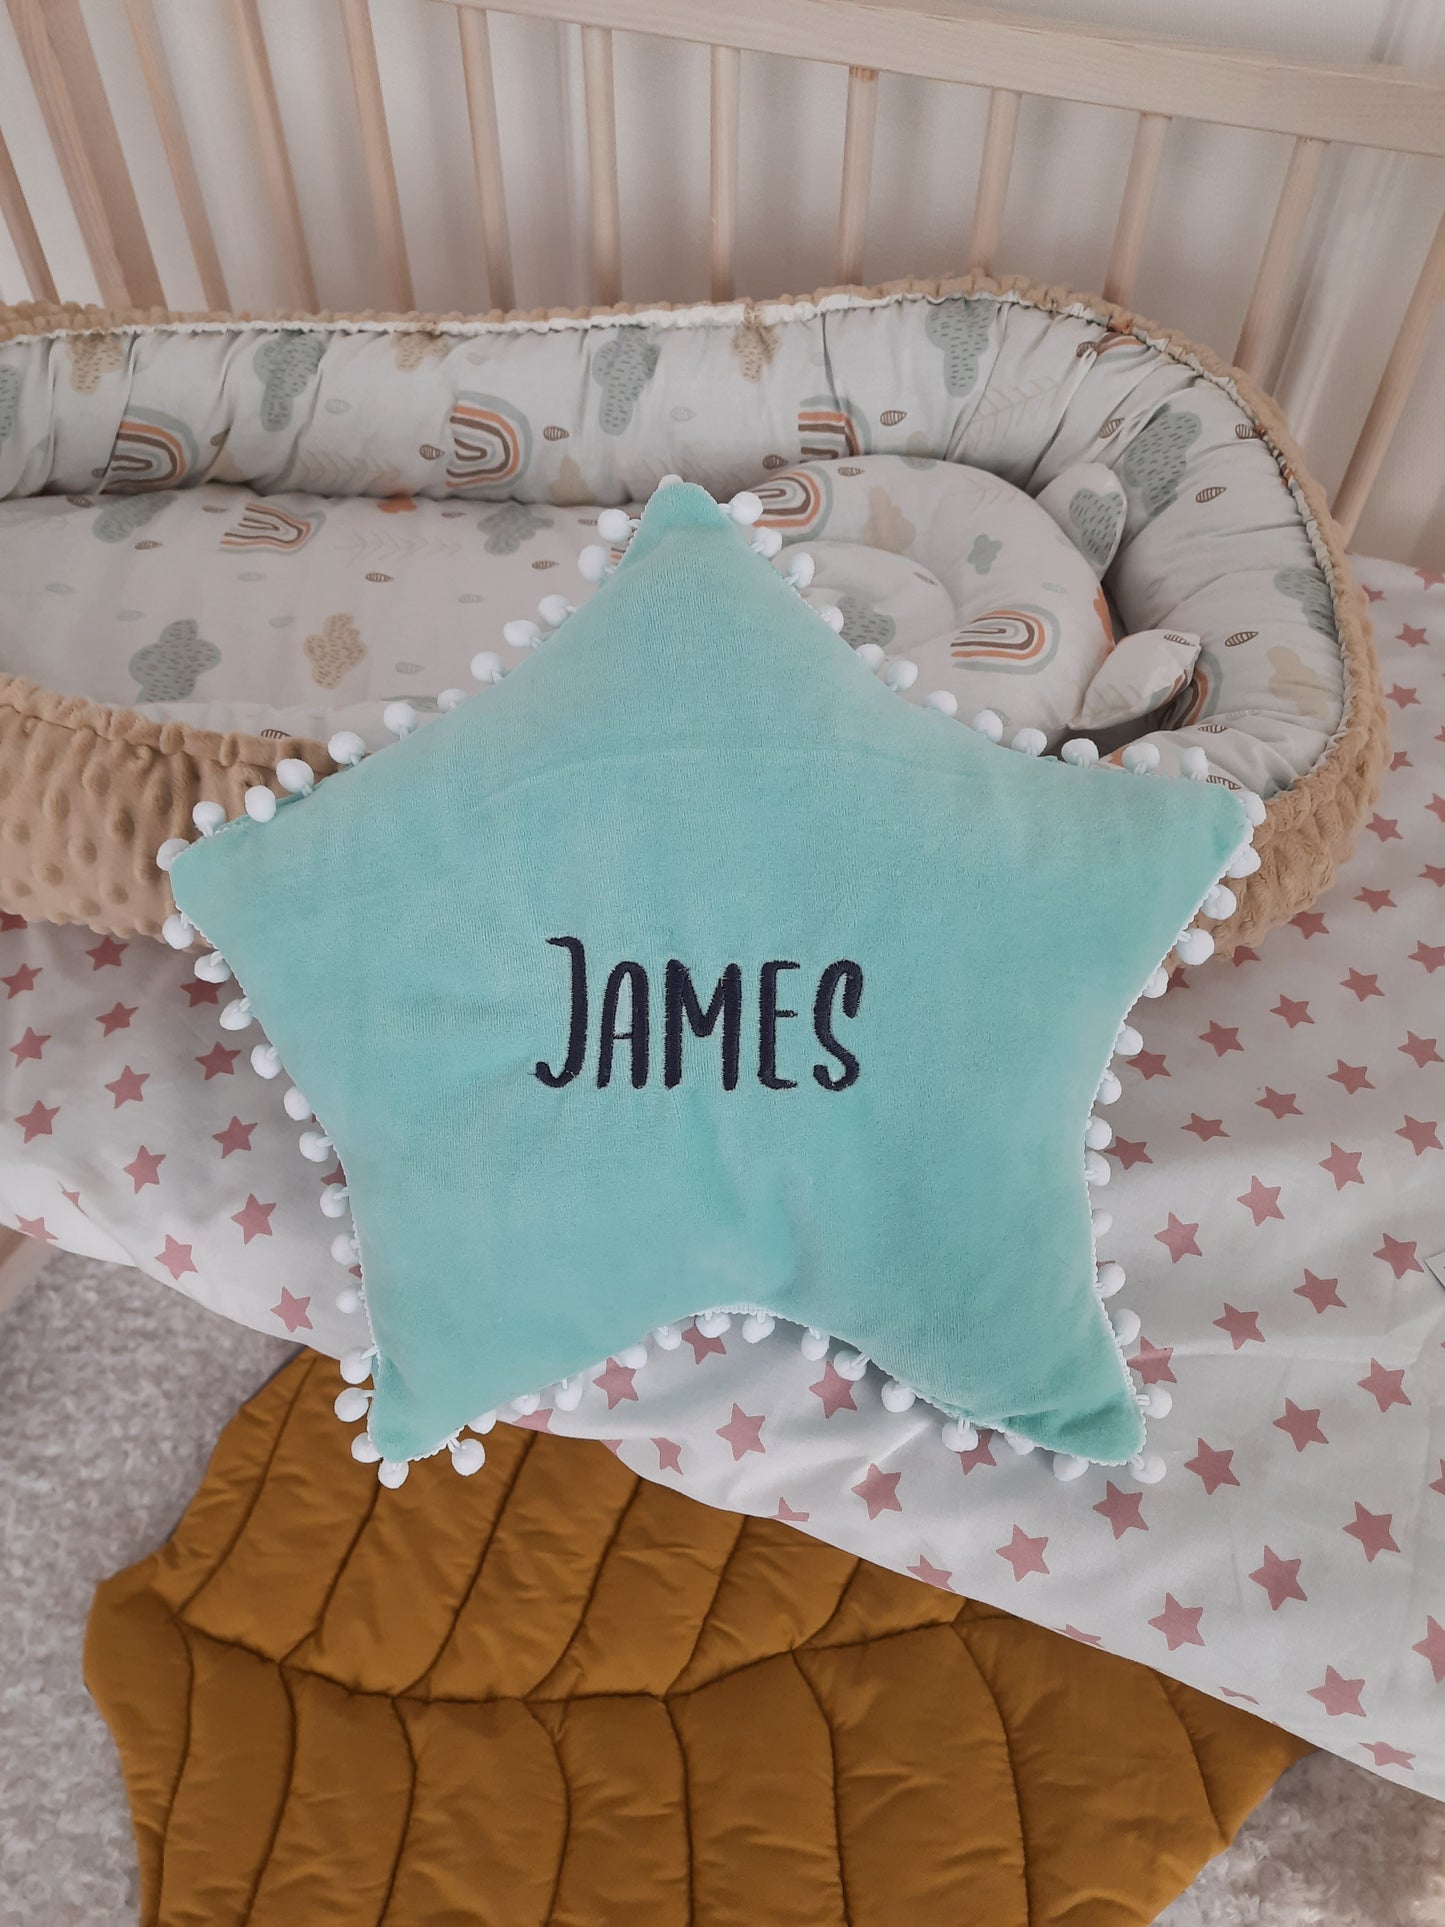 Blue star pillow and embroidered baby name James. Star pillow is a gift with the purchase of a braided crib bumper